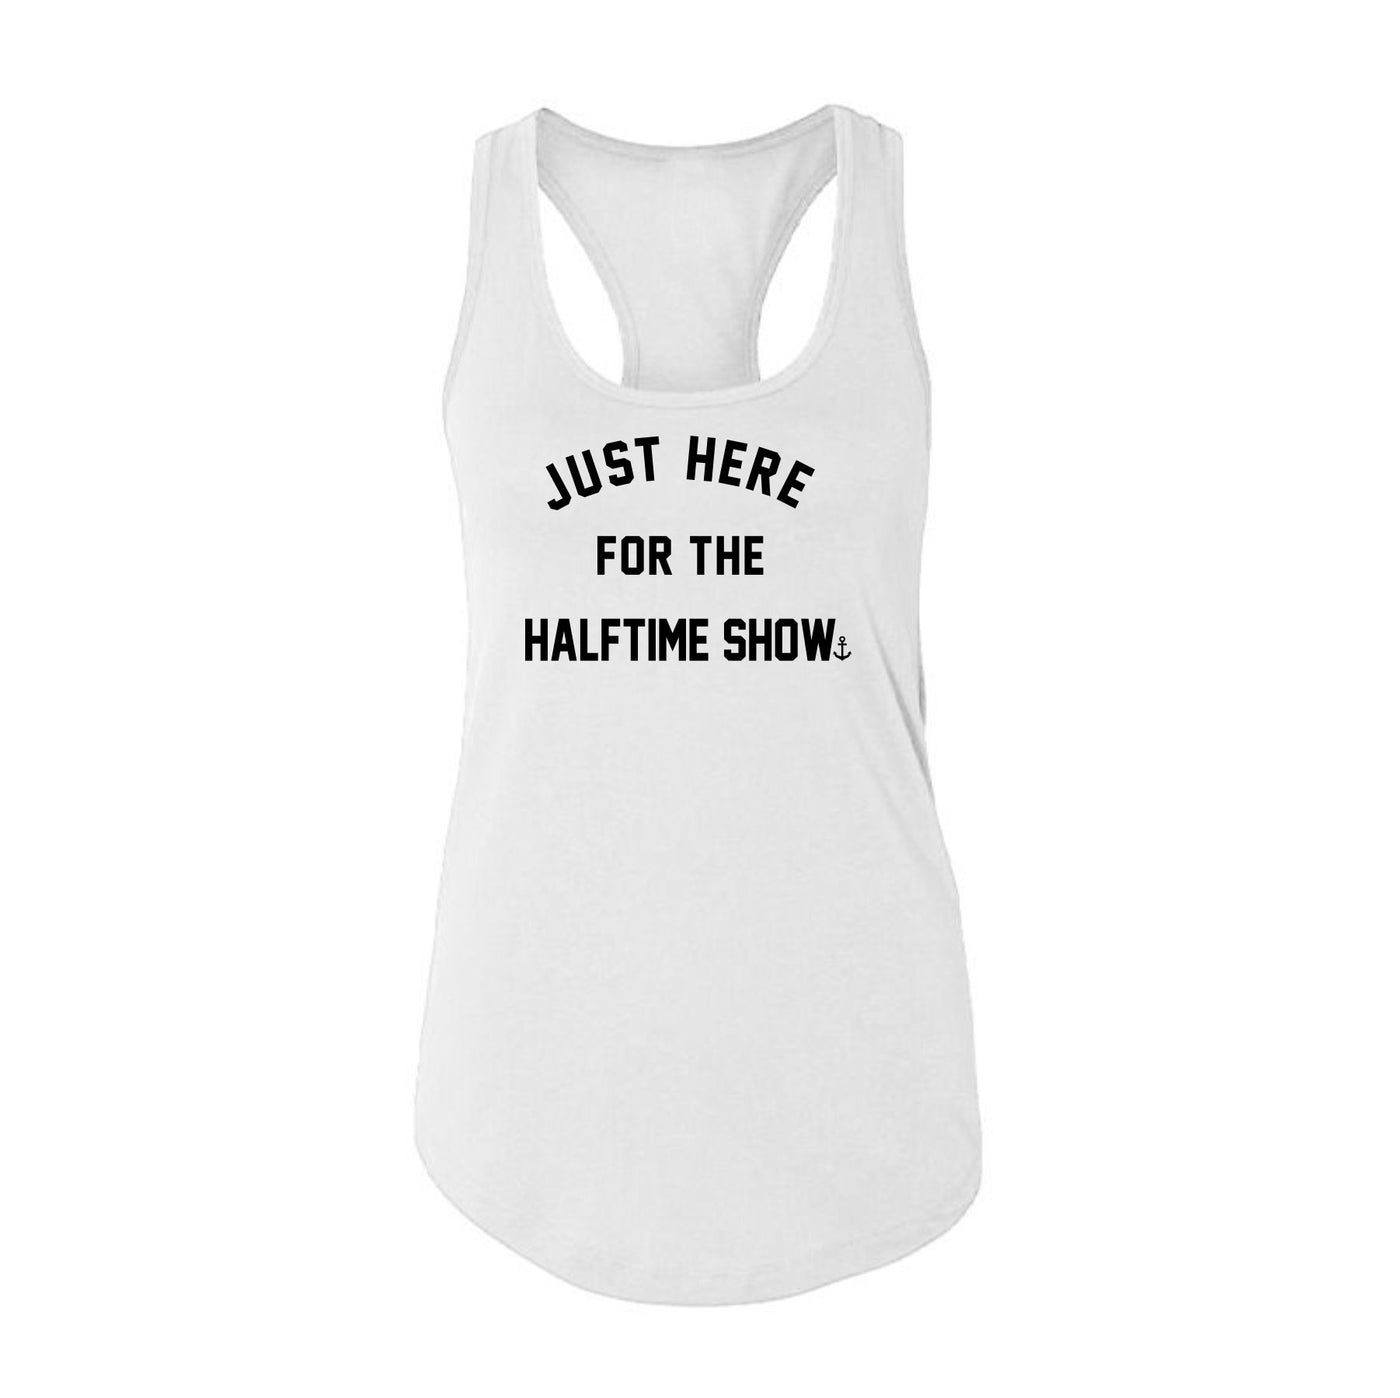 "Just Here For The Halftime Show" Ladies' Tank Top